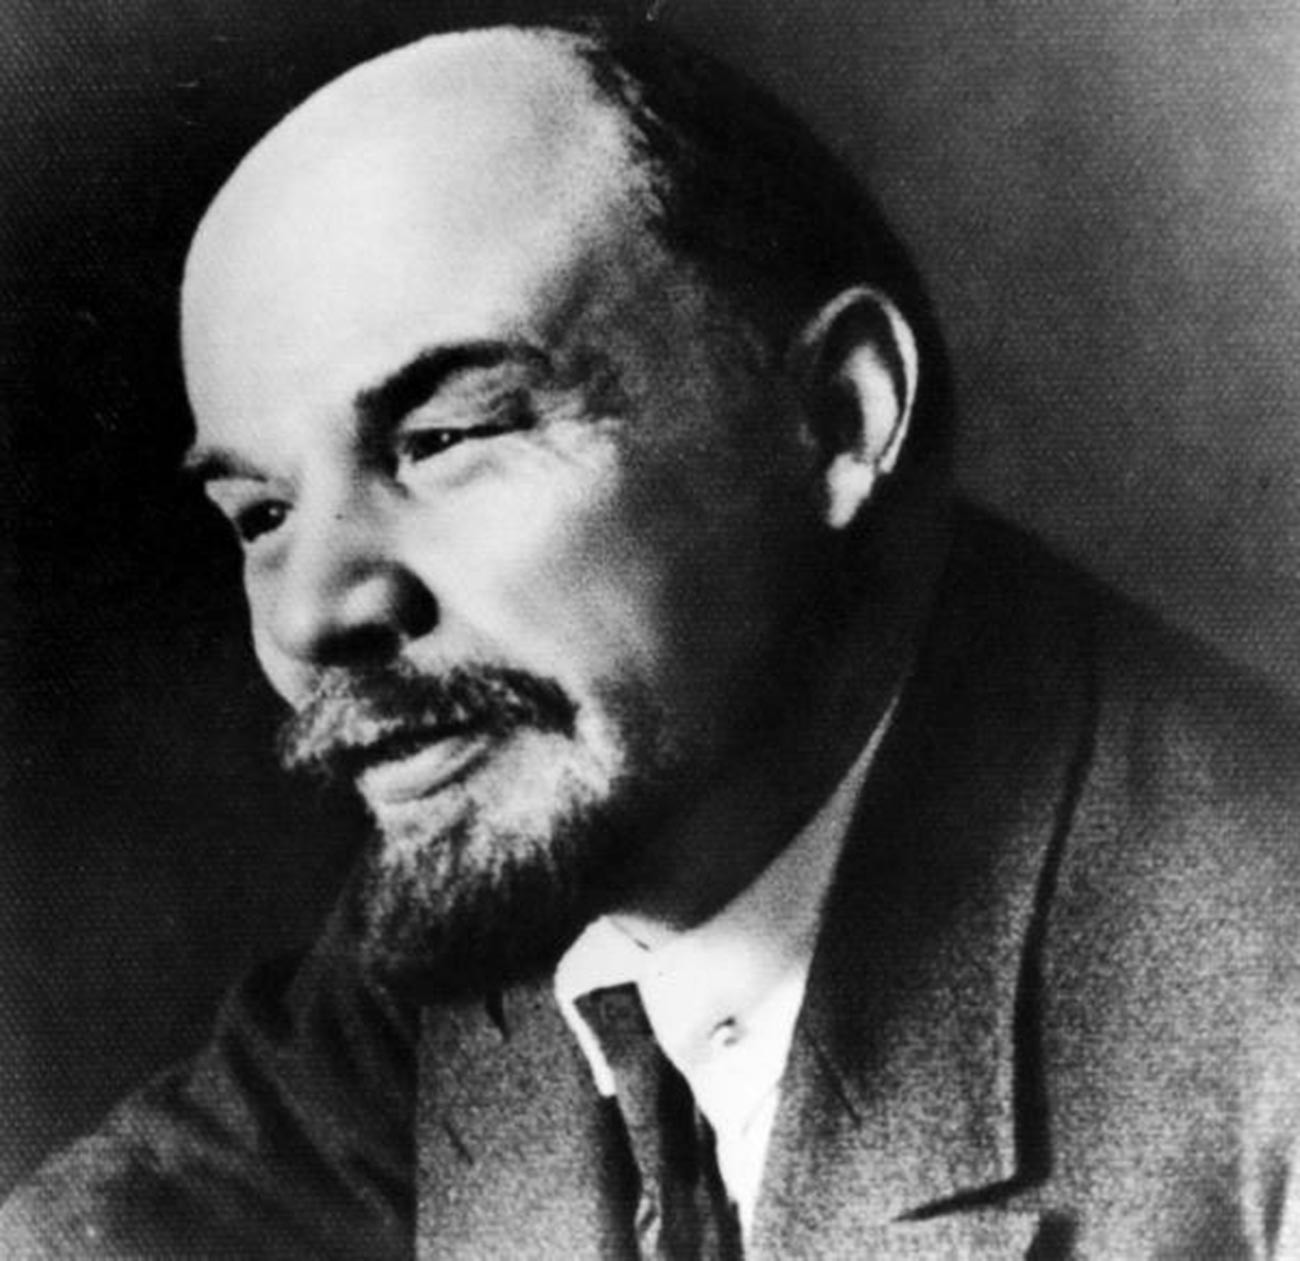 Vladimir Lenin as the first Chairman of the Council of People's Commissars